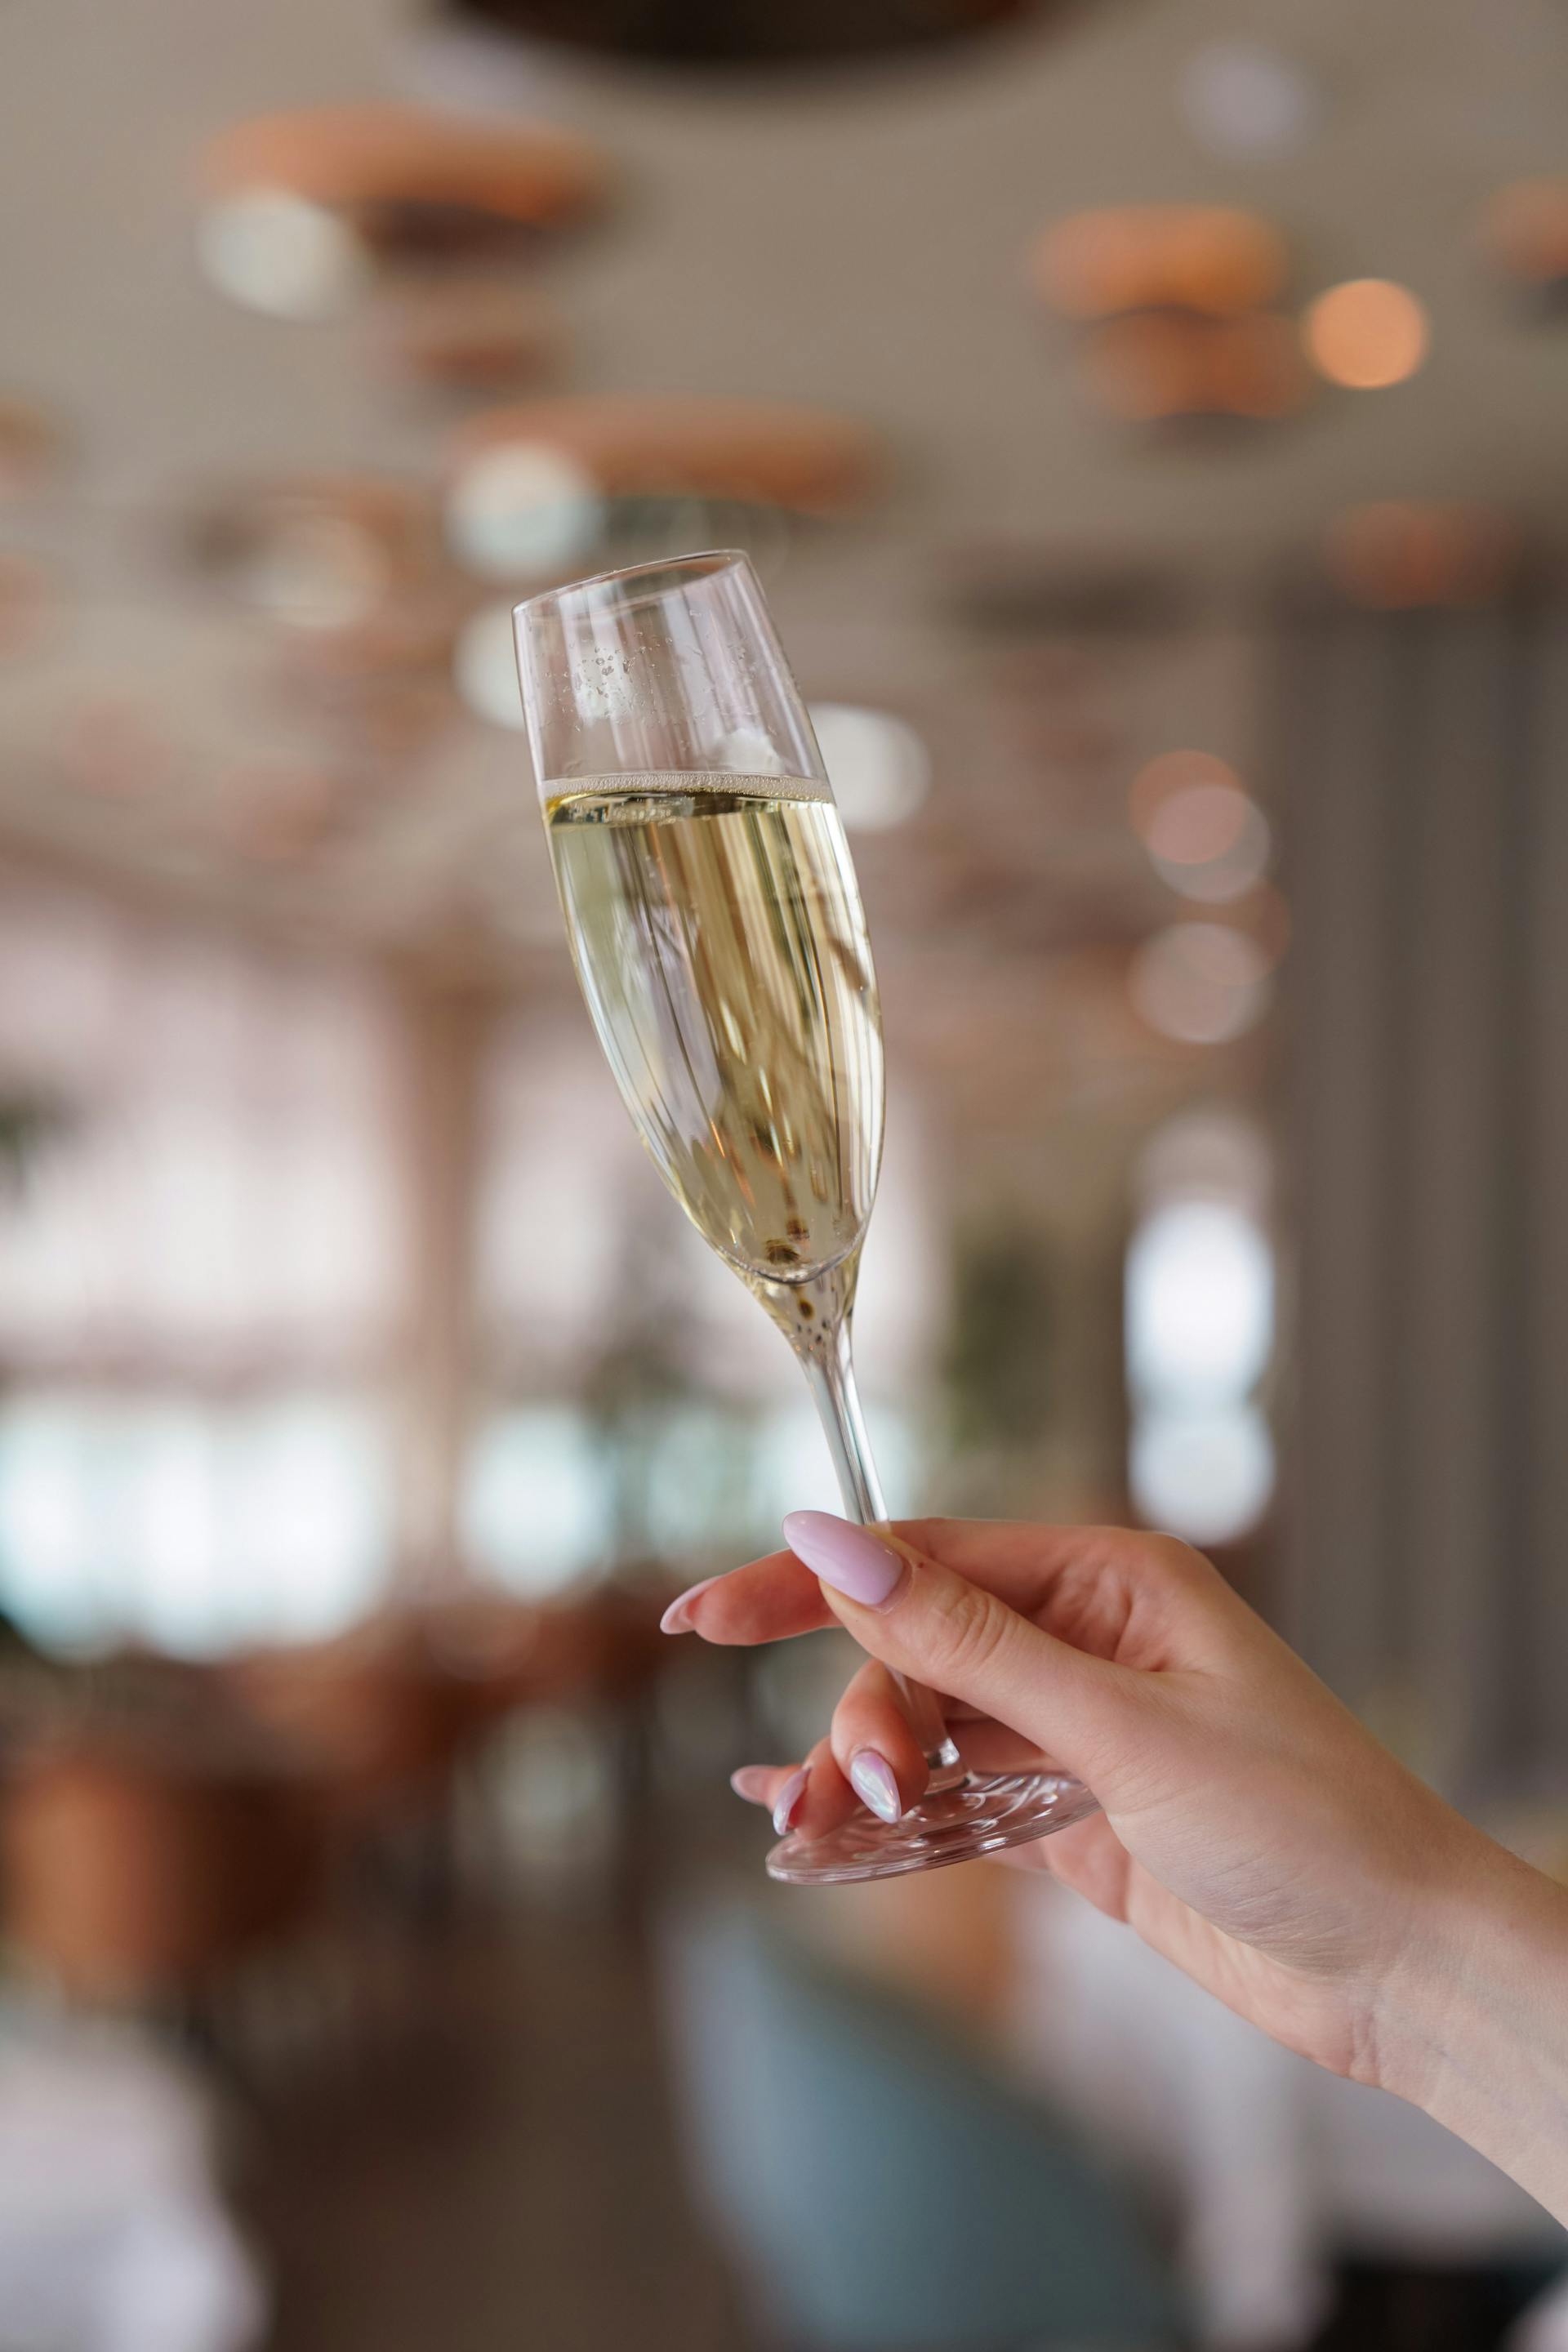 A person holding a glass of champagne | Source: Pexels